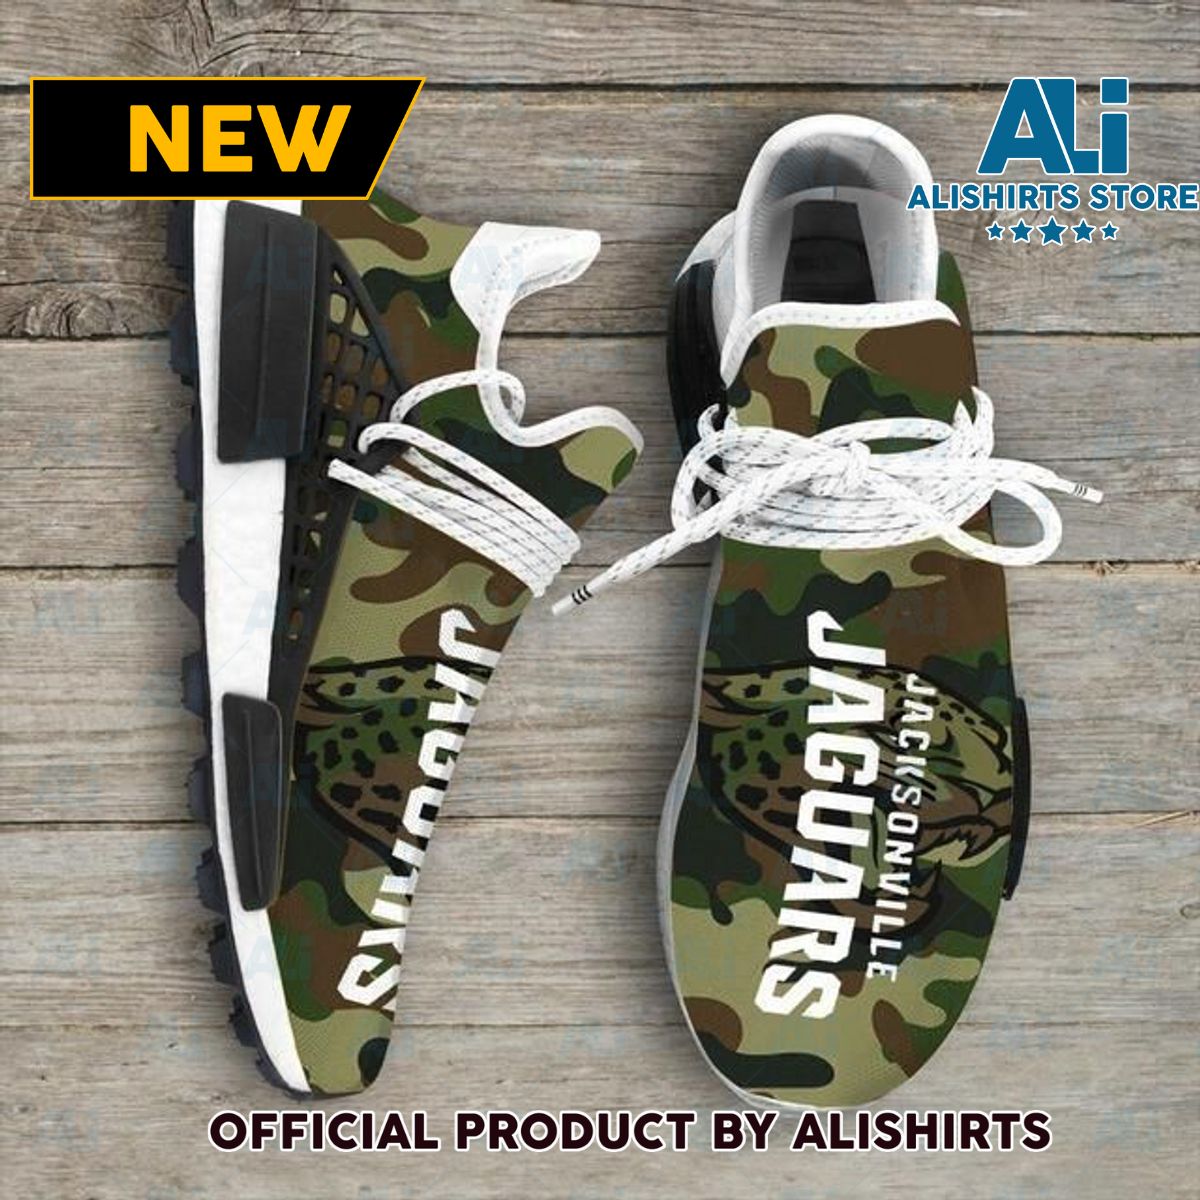 Camo Camouflage Jacksonville Jaguars NFL NMD Human Race shoes Adidas NMD Sneakers